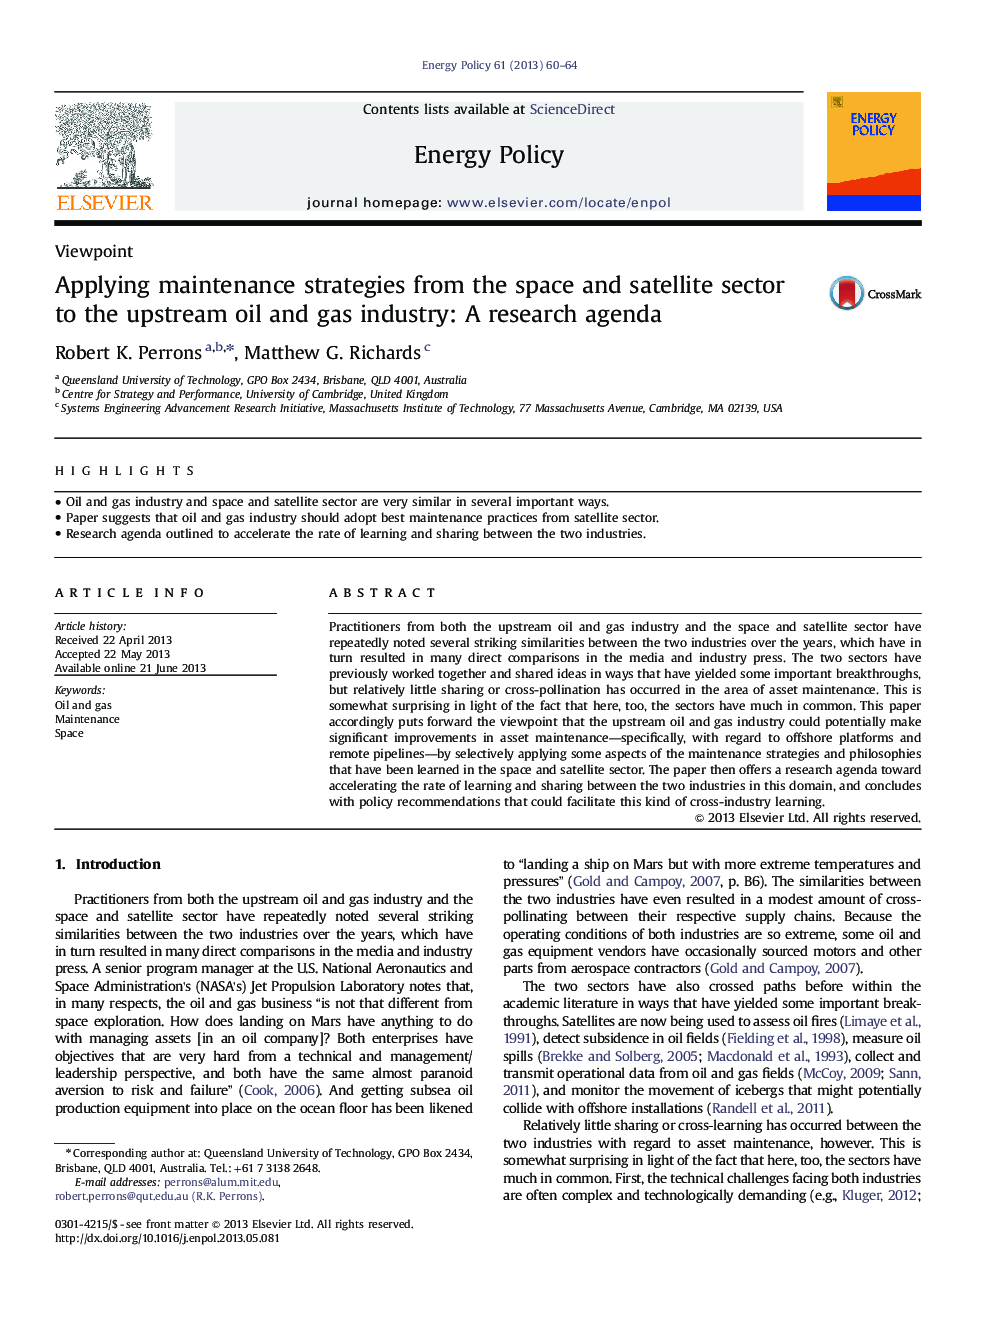 Applying maintenance strategies from the space and satellite sector to the upstream oil and gas industry: A research agenda